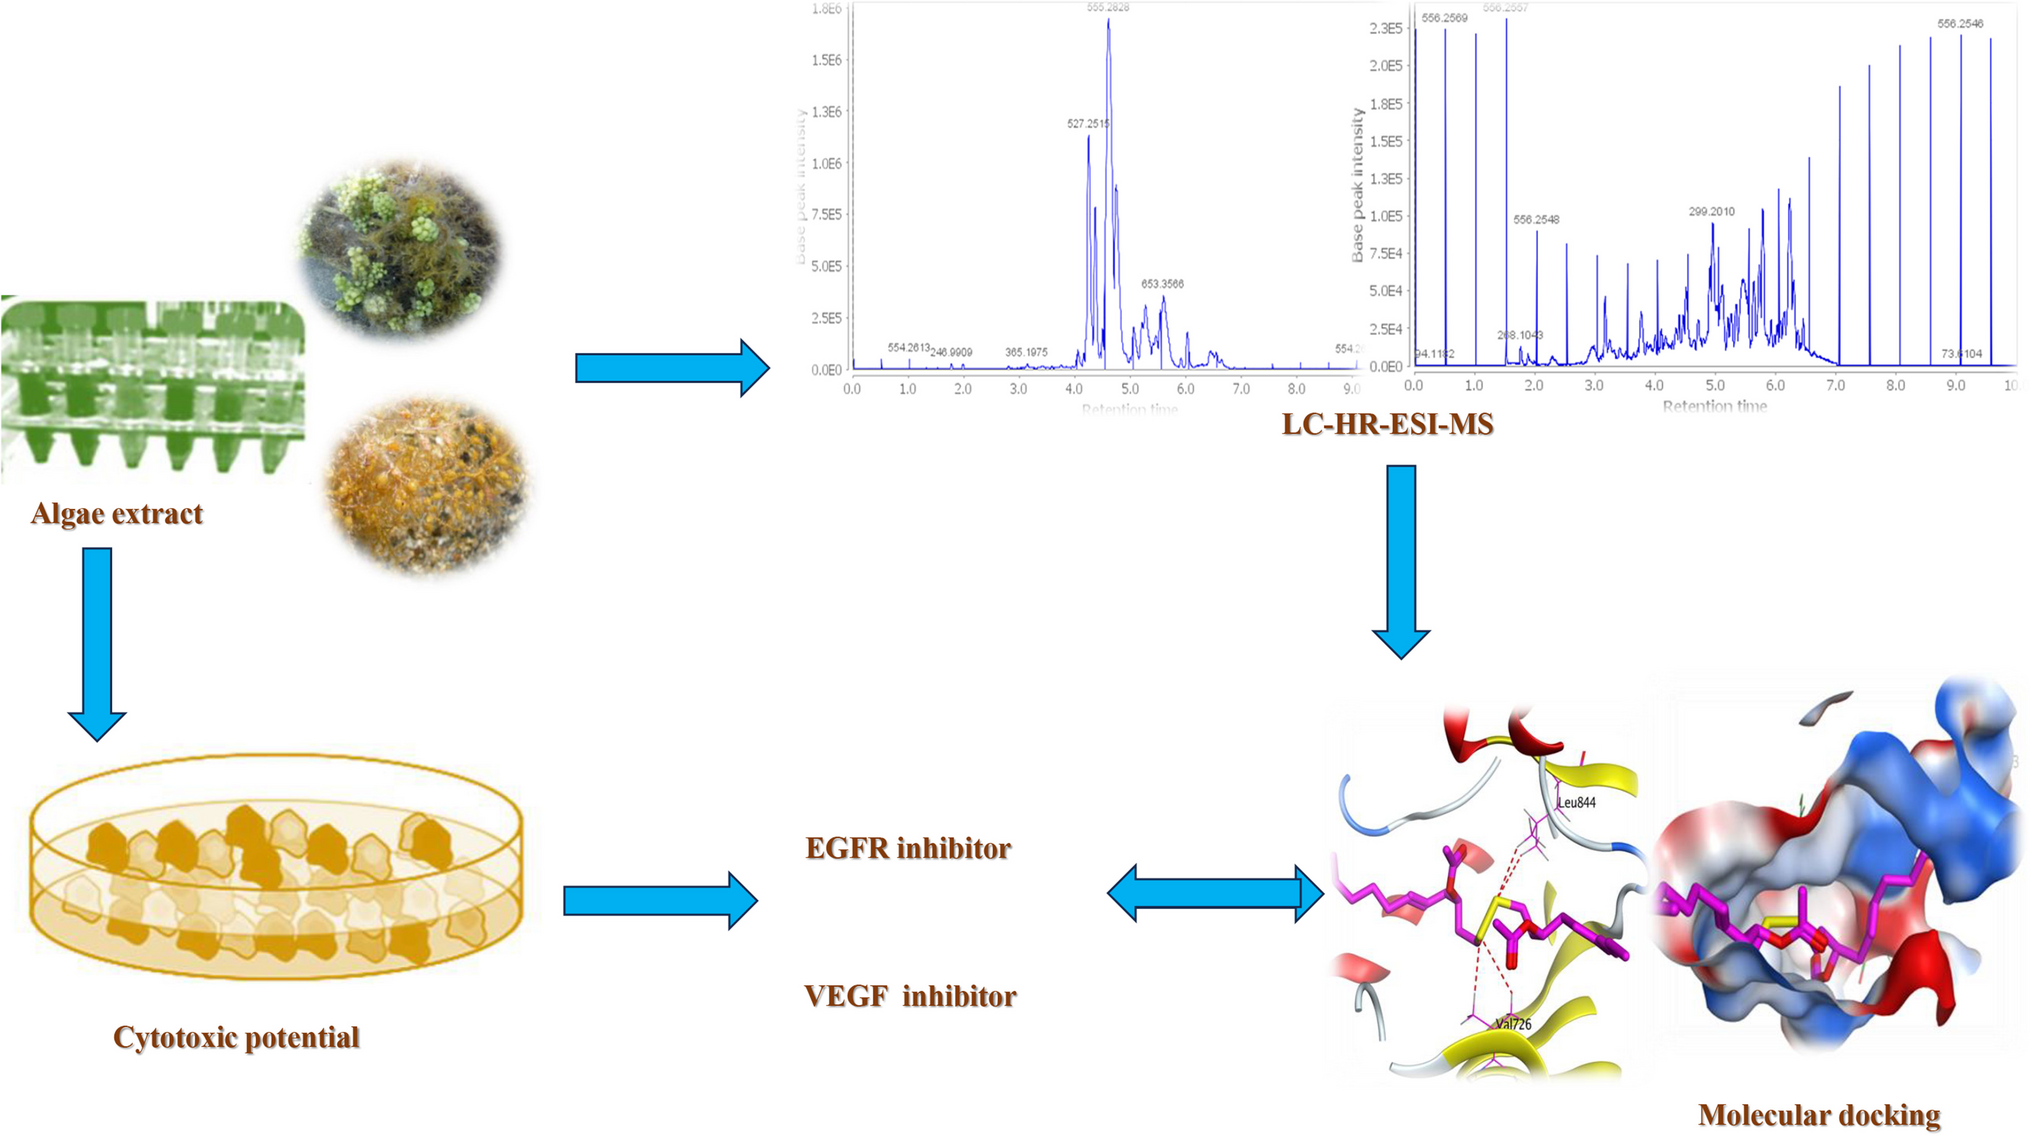 In Vitro Cytotoxic Potential of Ethanol Extract of Dictyopteris acrostichoides Against Human Cancer Cells